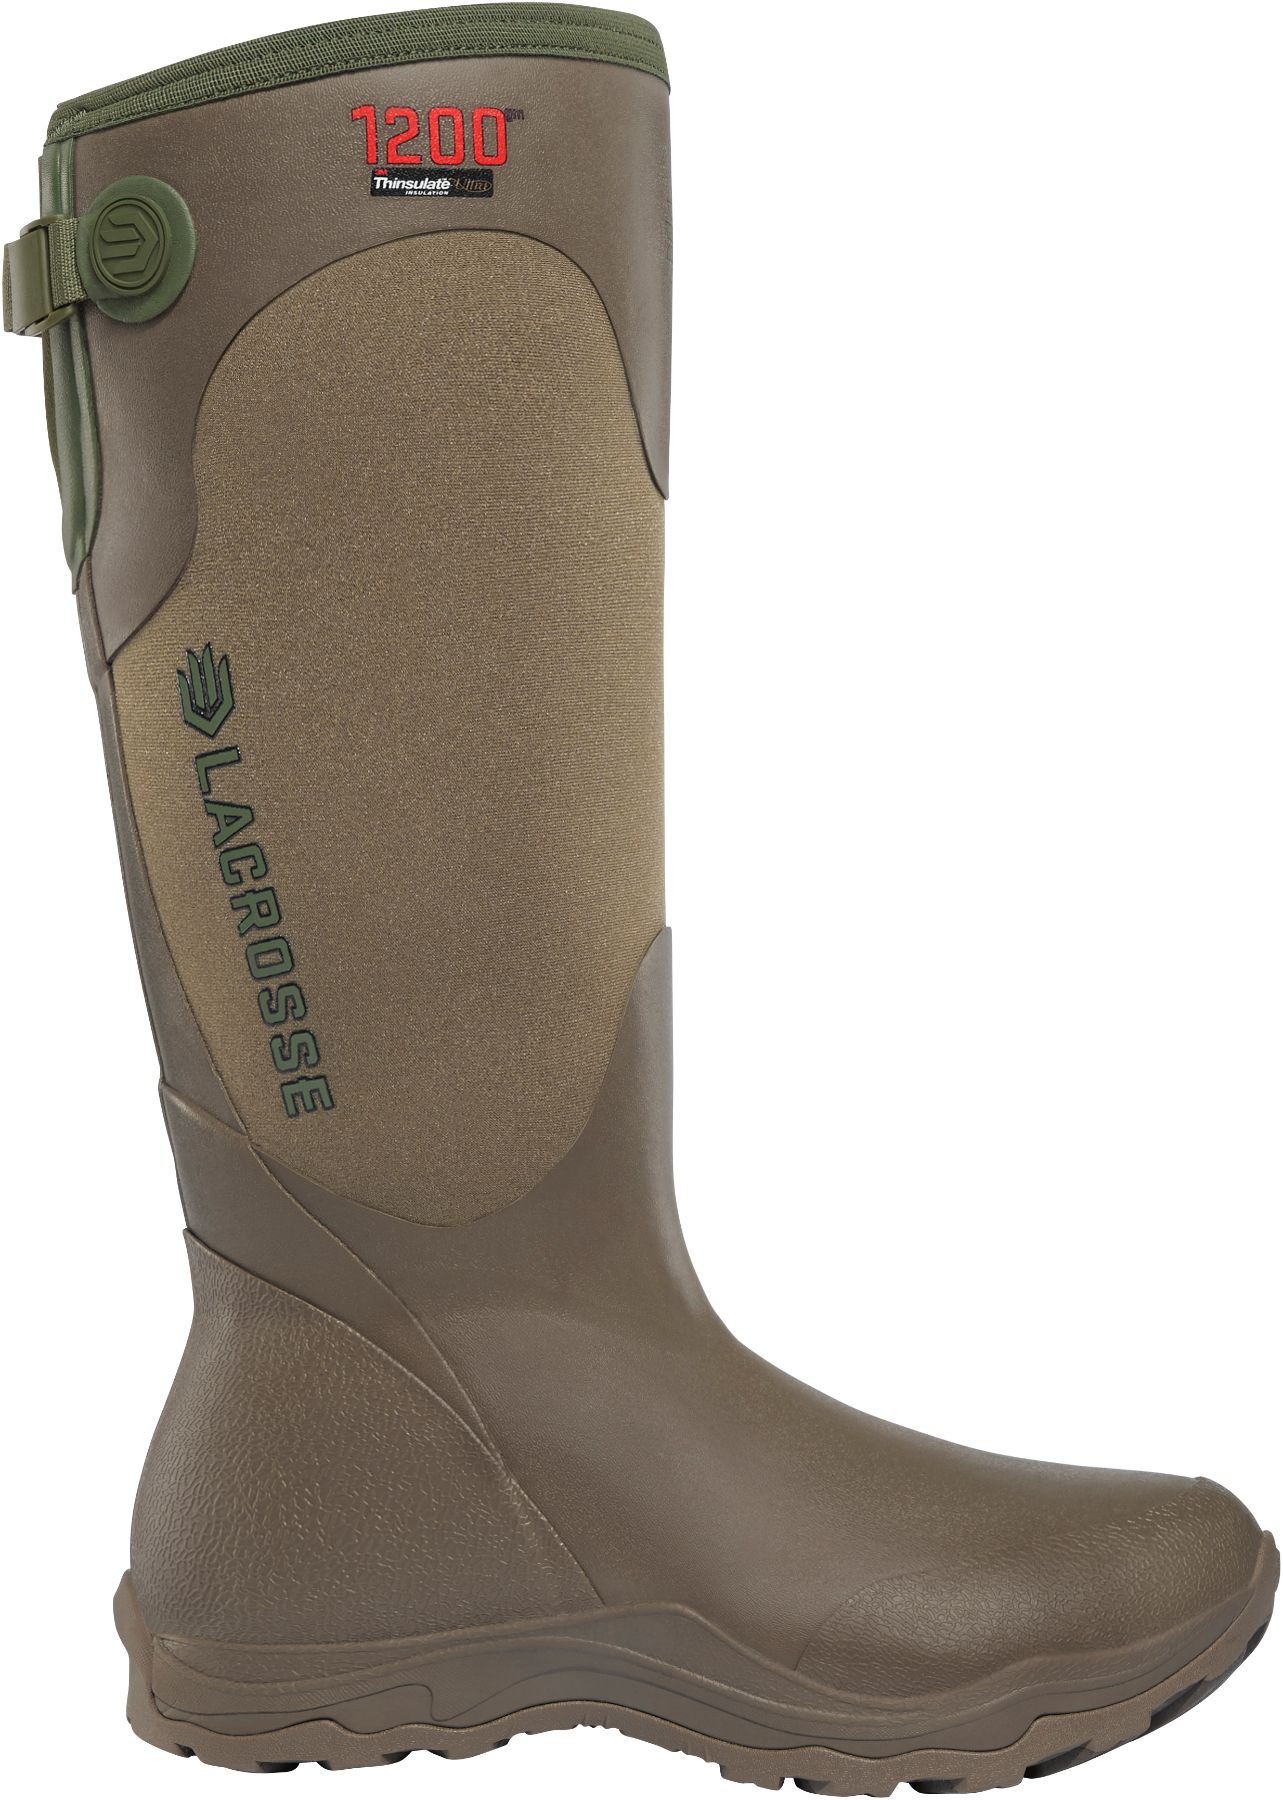 LaCrosse Alpha Agility 1200 Insulated Waterproof Hunting Boots for Ladies - Brown/Green - 8M